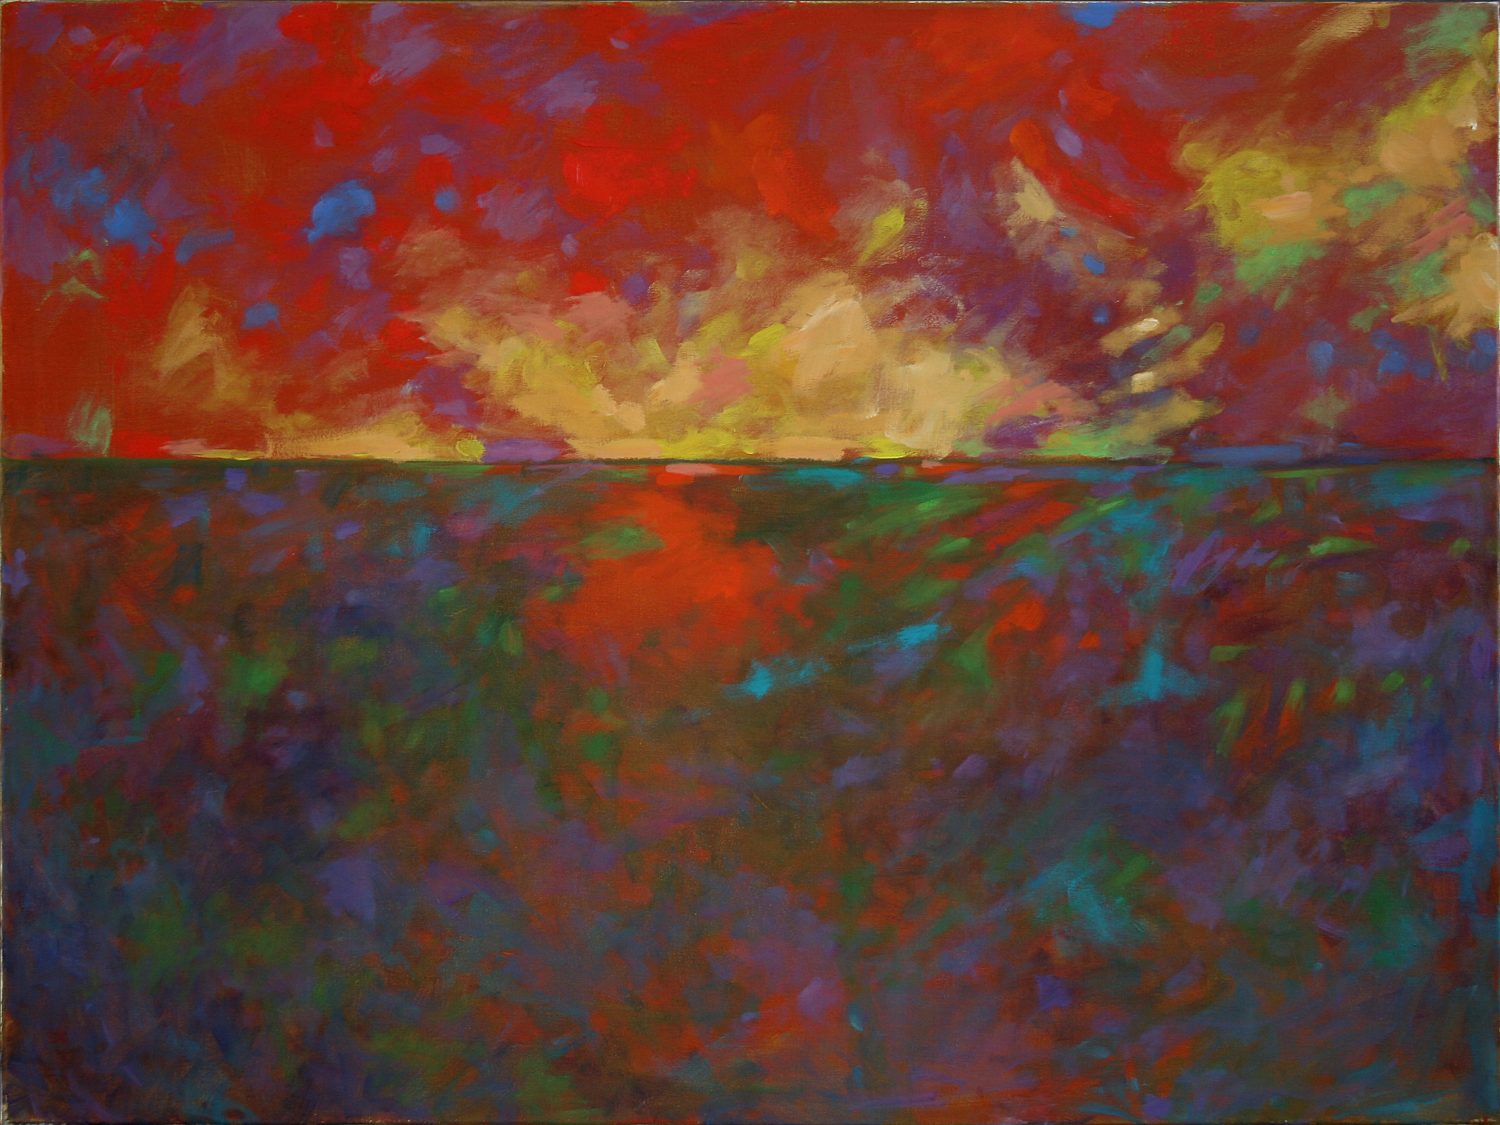 thumbnail of Flat Land II by American artist Norman Gorbaty. medium: oil on canvas. dimensions: 30 x 40 inches. date: 2006